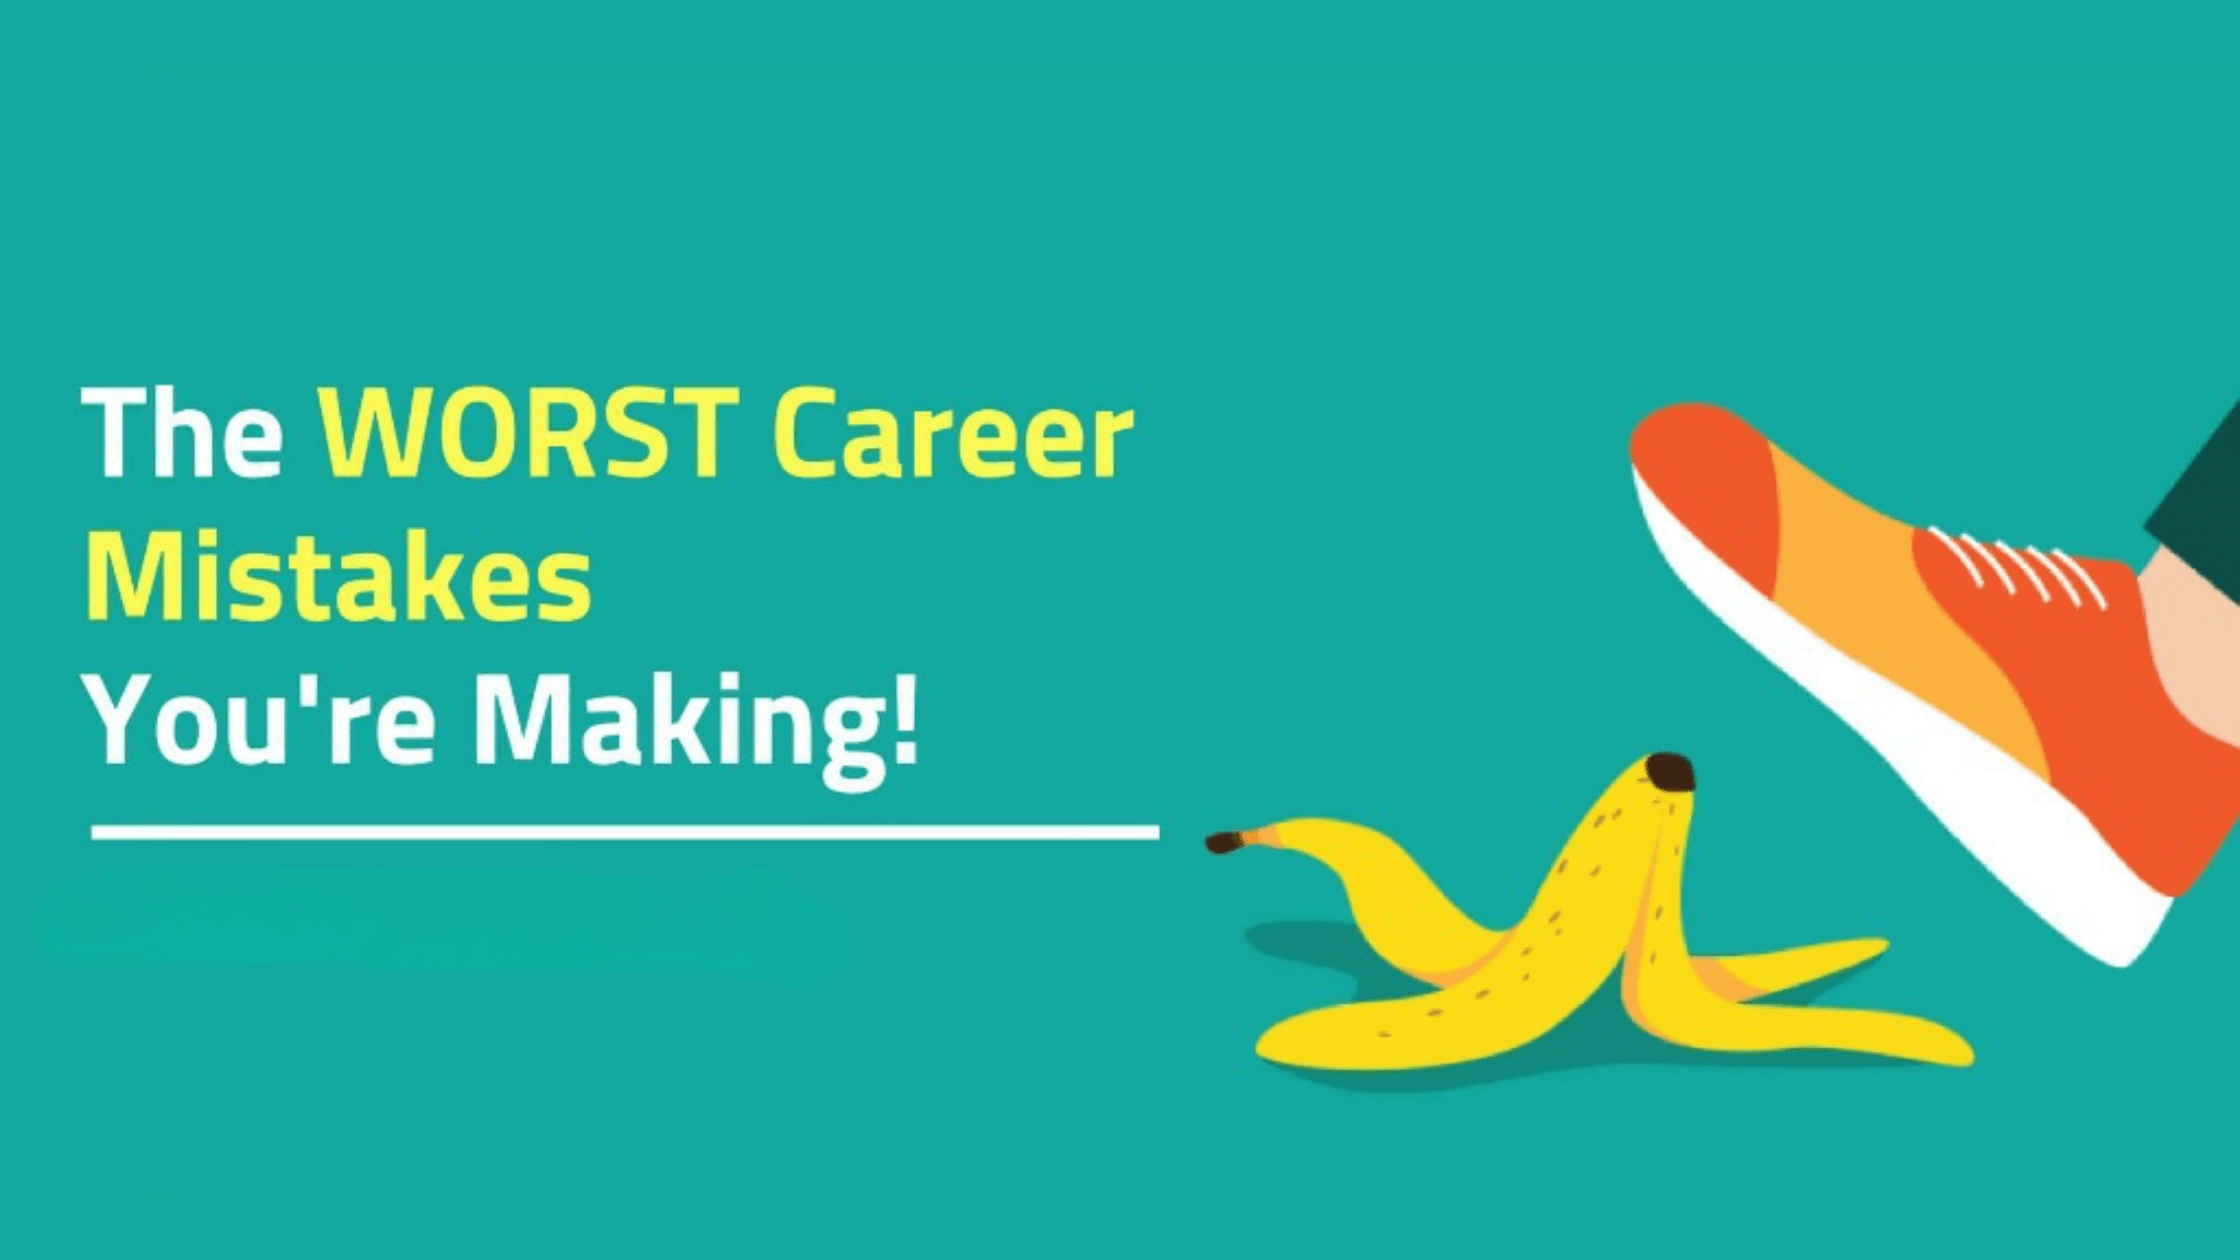 CAREER MISTAKES YOU’RE MOST LIKELY TO MAKE